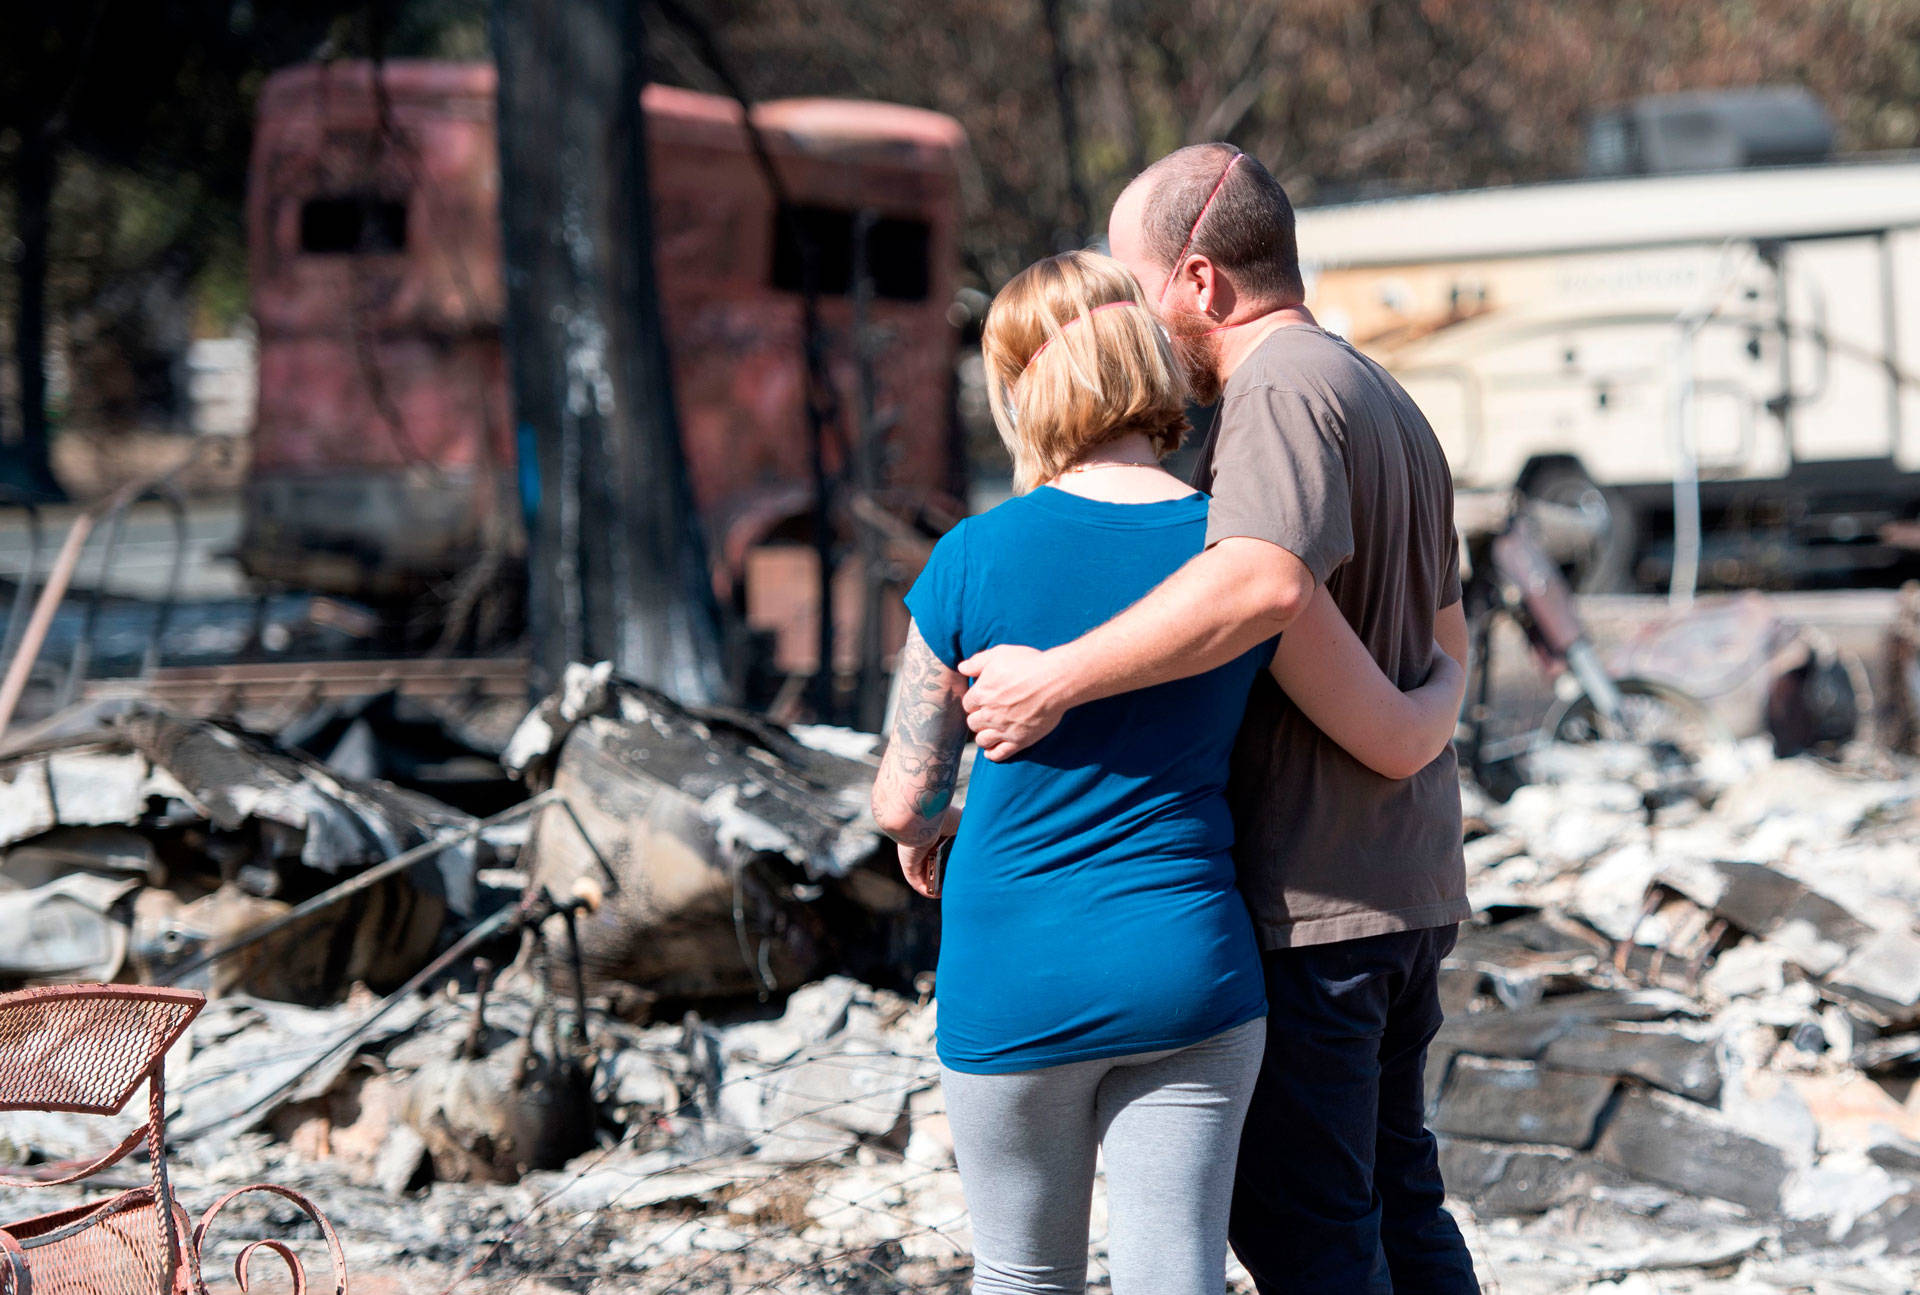 Mandi and Lane Summit embrace in front of their fire-destroyed home in the Mendocino County community of Redwood Valley on Oct. 15, 2017. Cal Fire determined the Redwood Fire started in two locations and was caused by trees or parts of trees falling onto PG&amp;E power lines. JOSH EDELSON/AFP/Getty Images